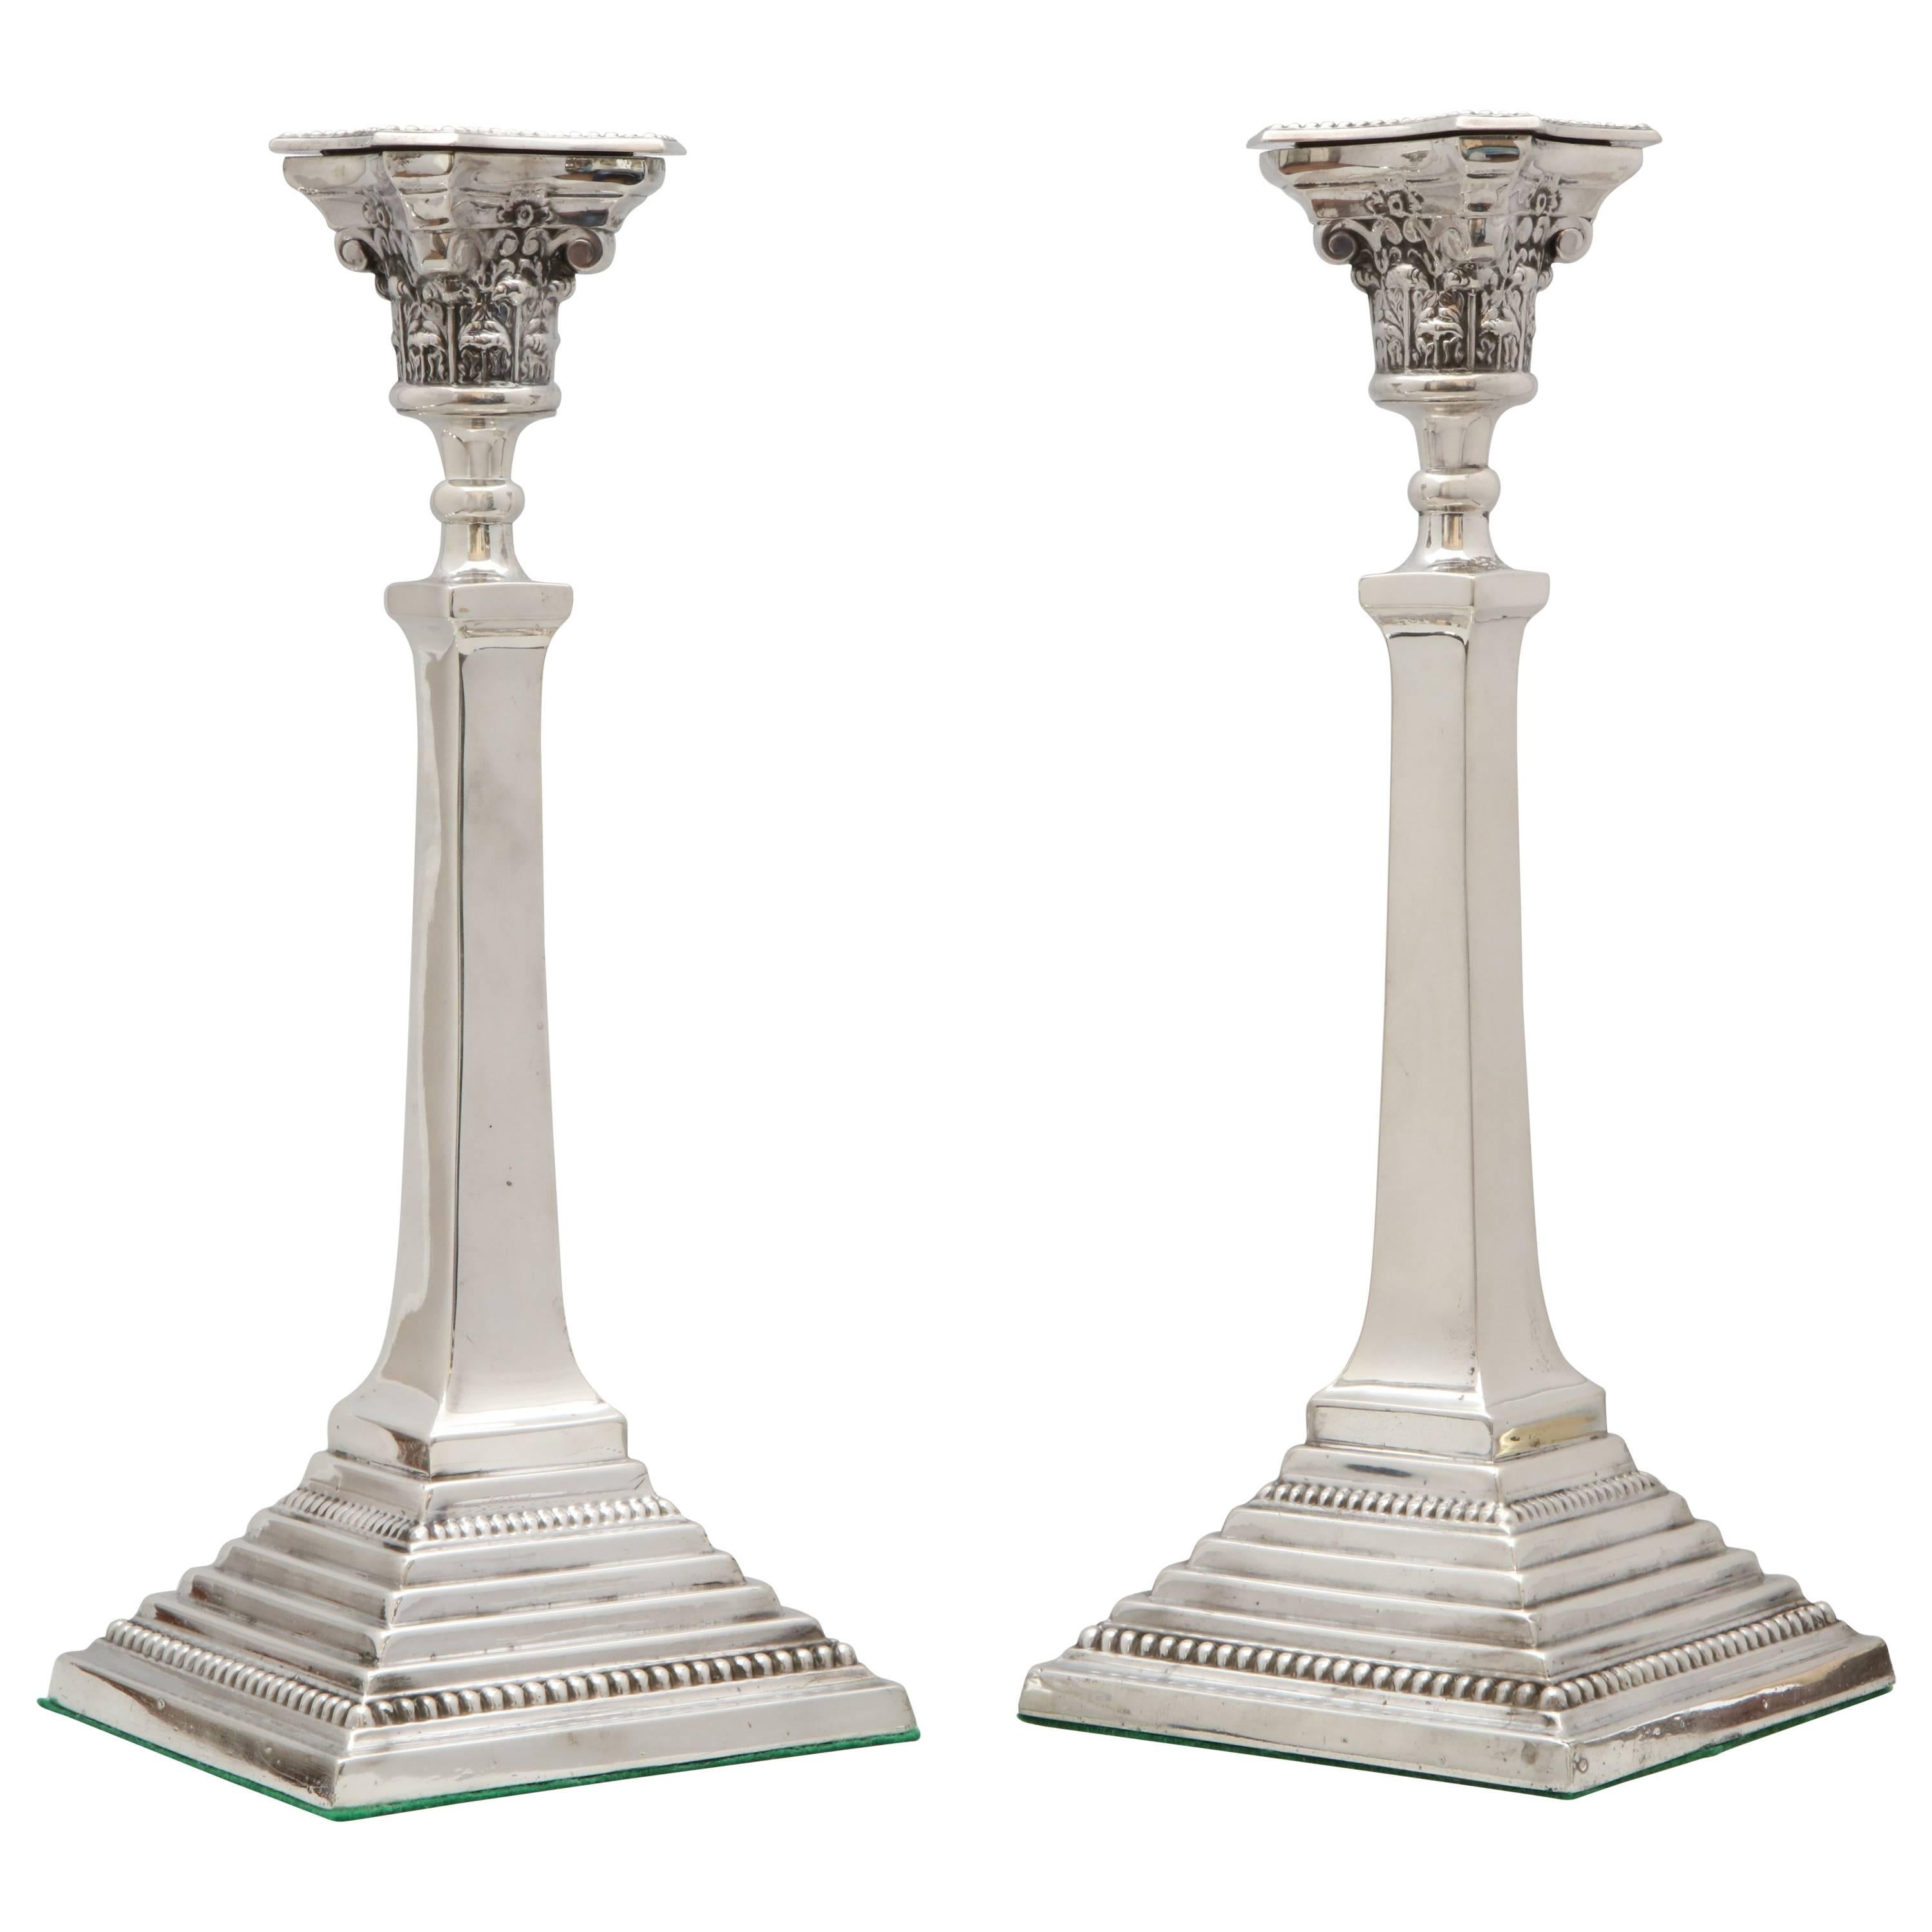 Pair of Tall Edwardian Sterling Silver Neoclassical Column-Form Candlesticks